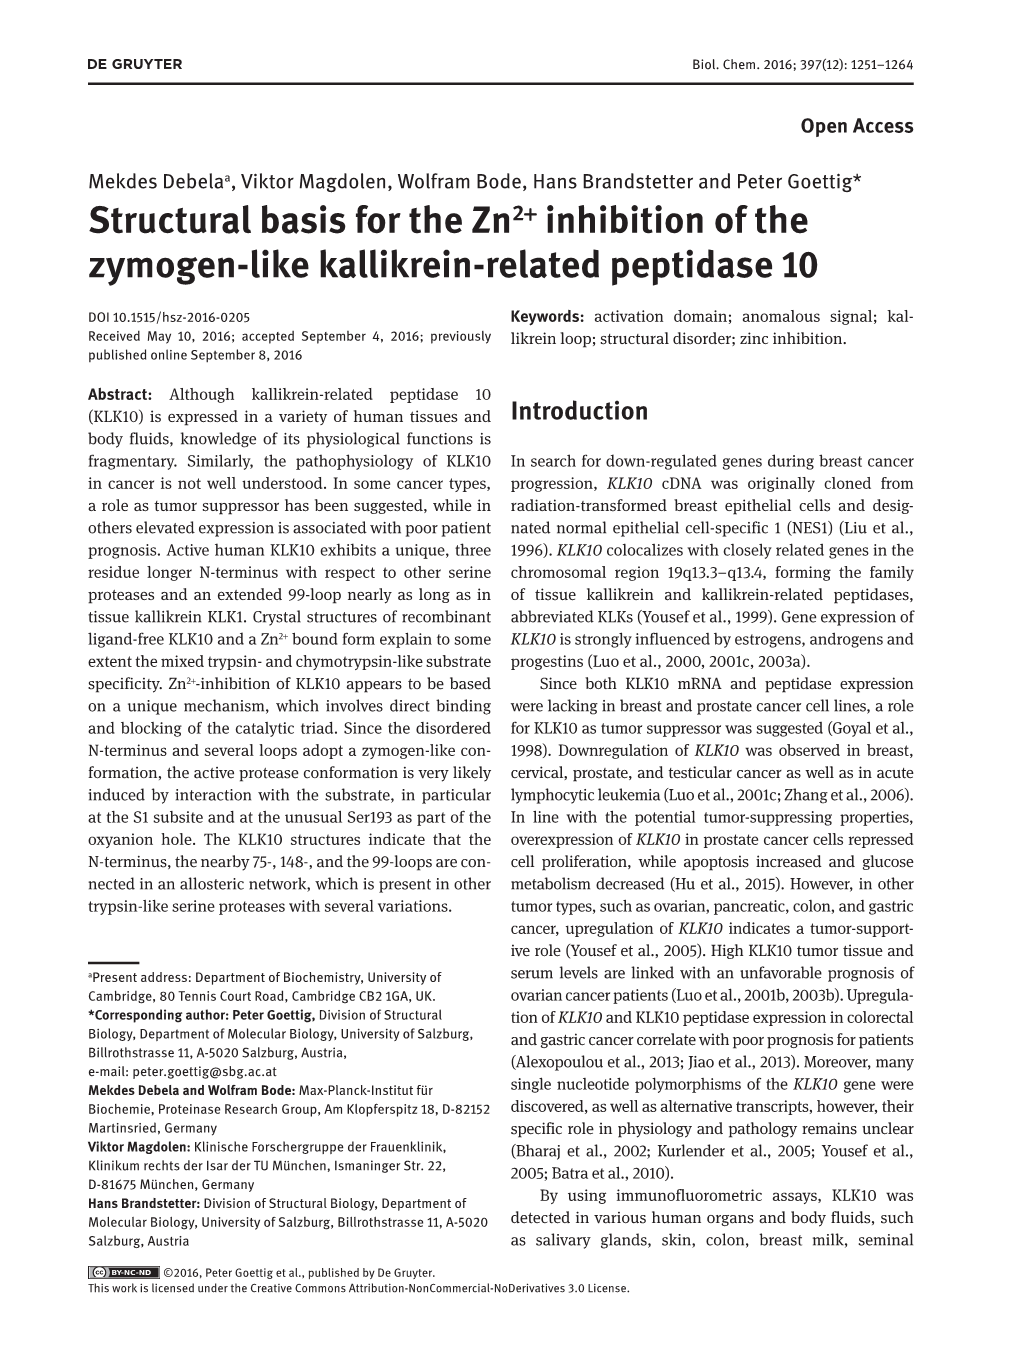 Structural Basis for the Zn2+ Inhibition of the Zymogen-Like Kallikrein-Related Peptidase 10